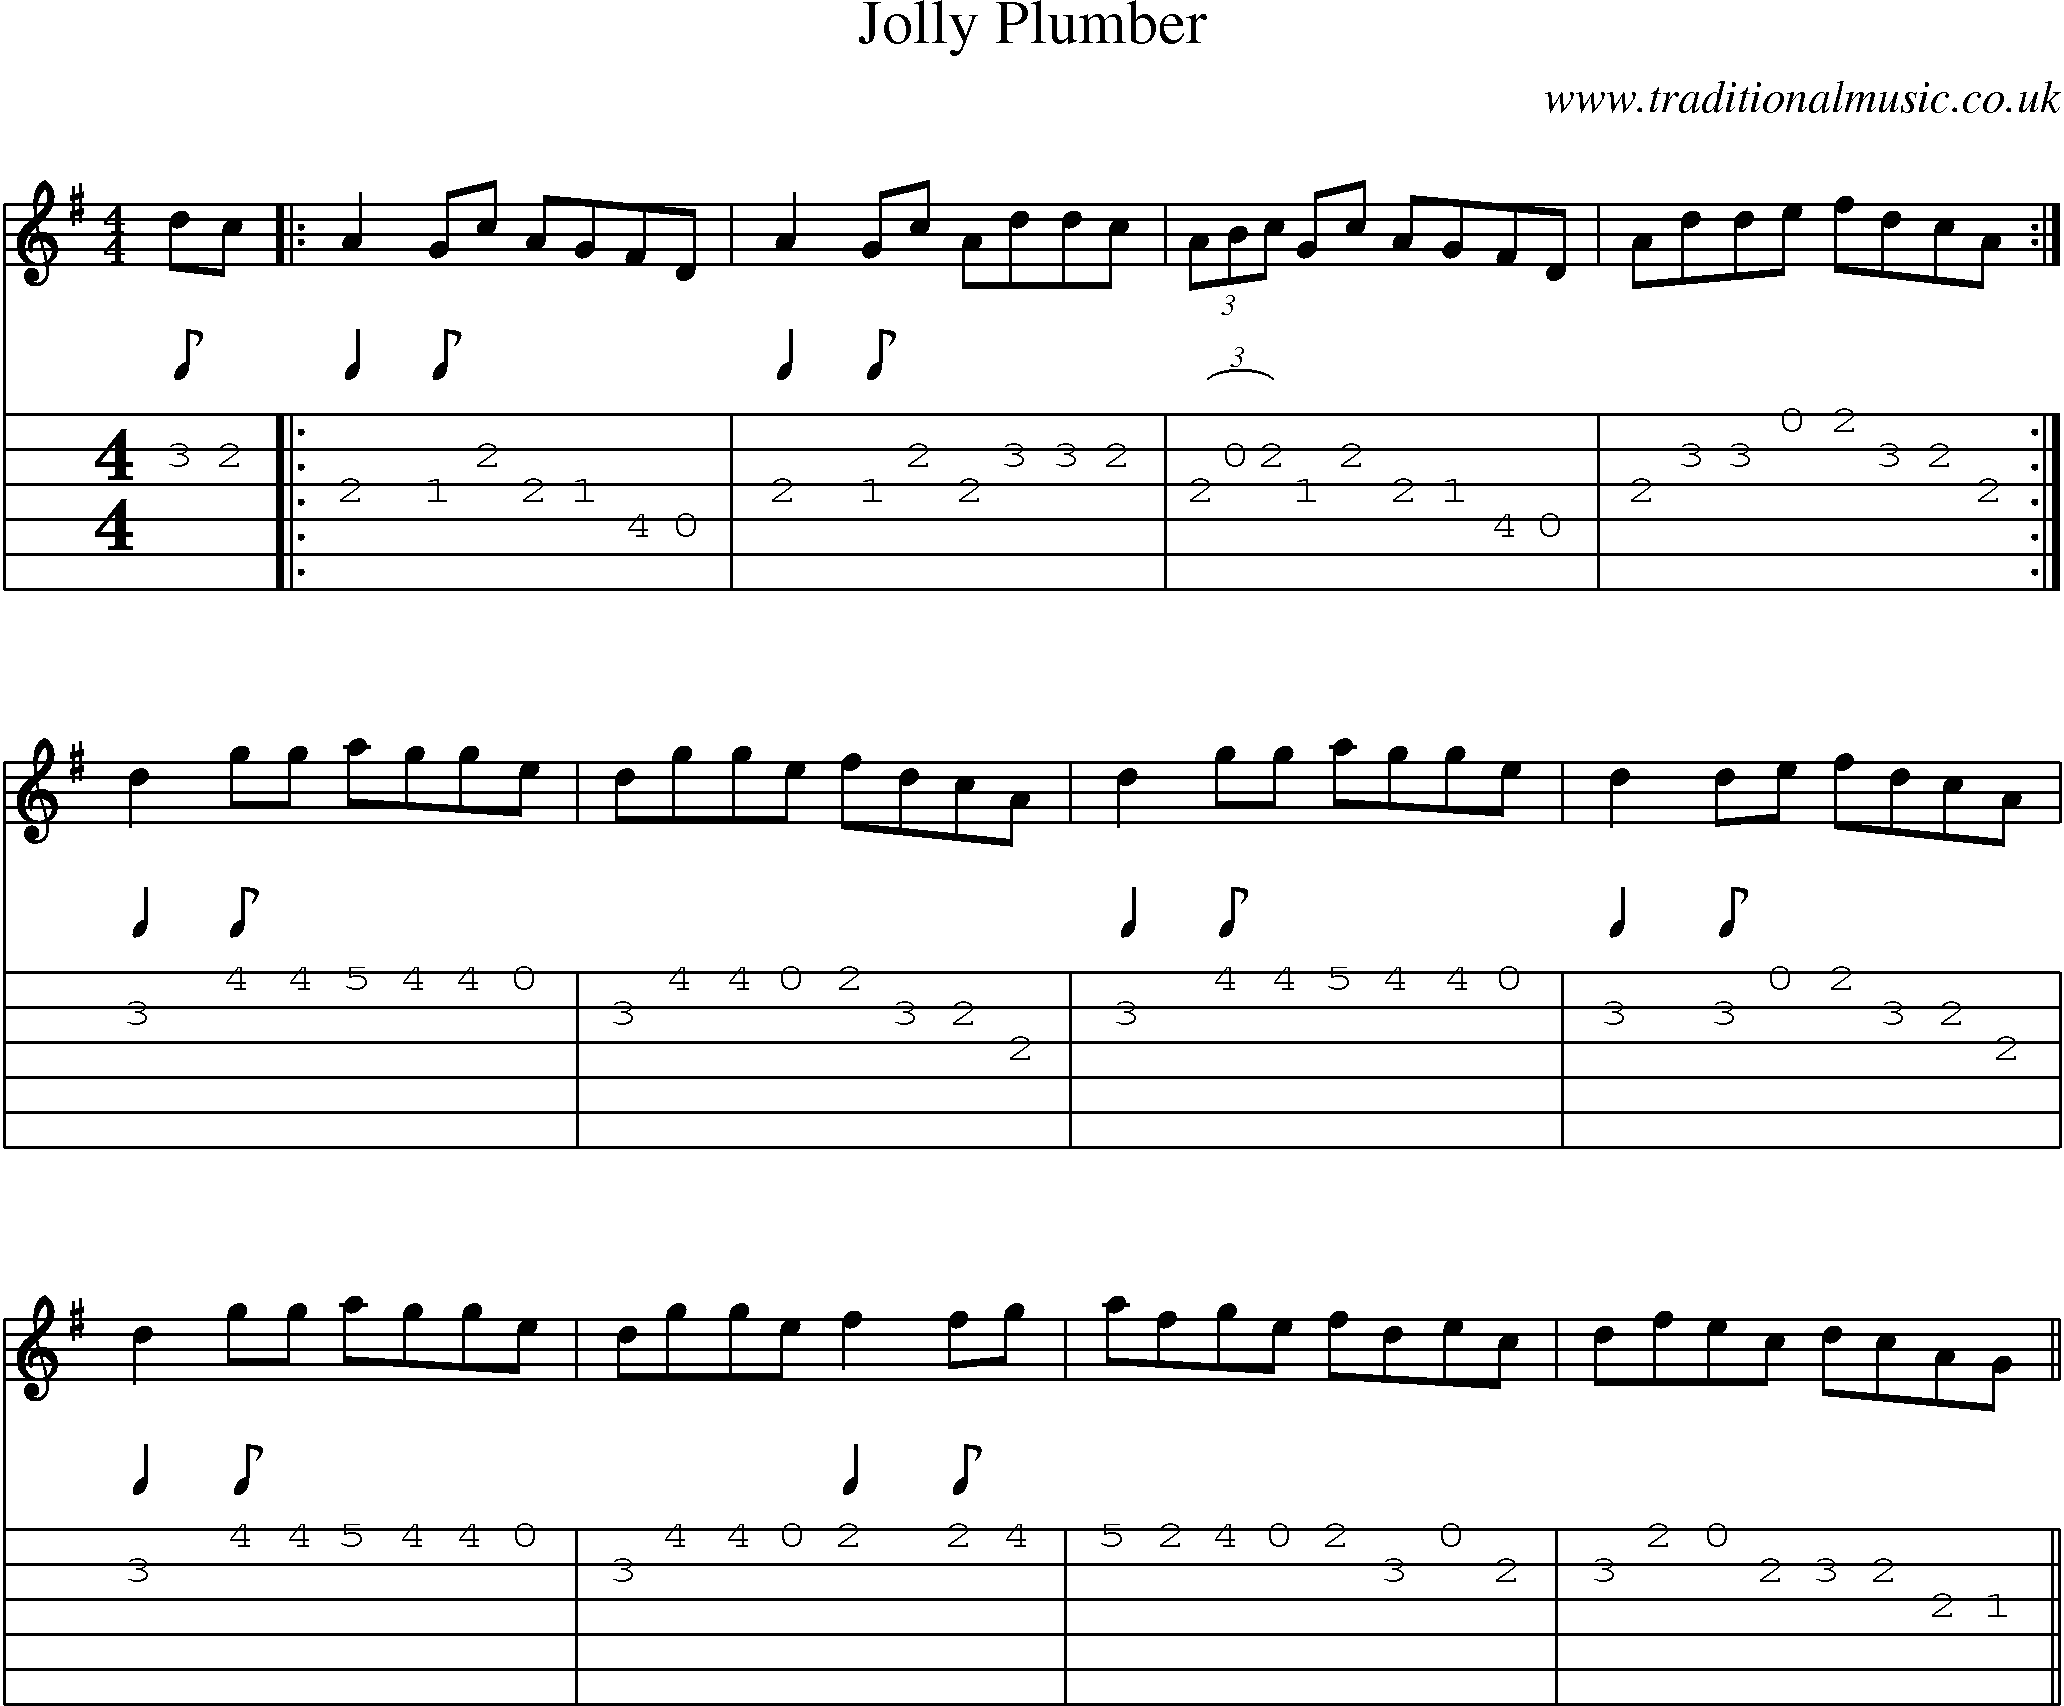 Music Score and Guitar Tabs for Jolly Plumber